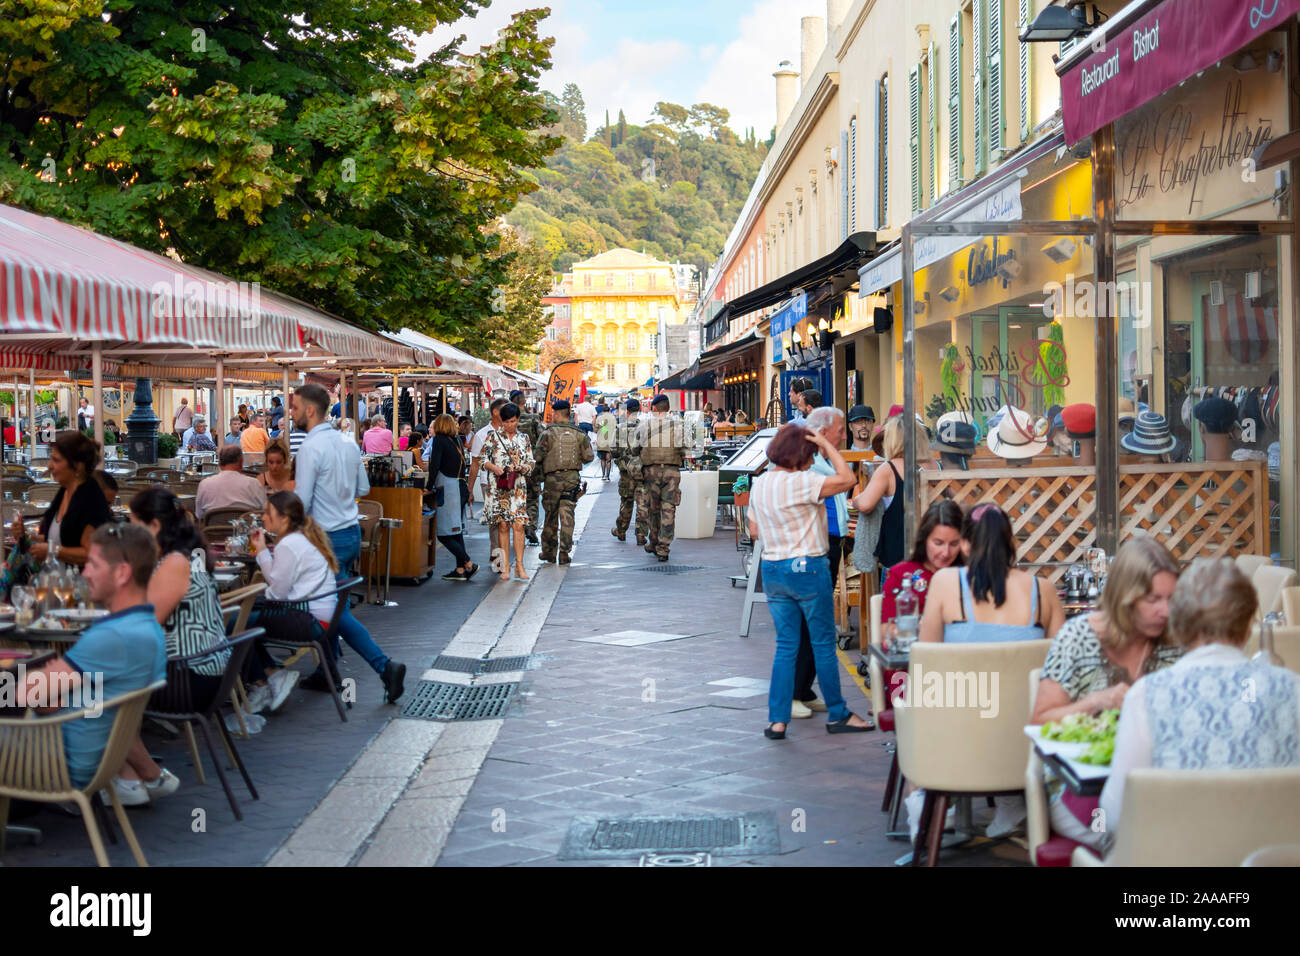 French soldiers in military fatigues patrol the Cours Saleya Old Town area in Nice, France as diners enjoy an early dinner on the French Riviera. Stock Photo